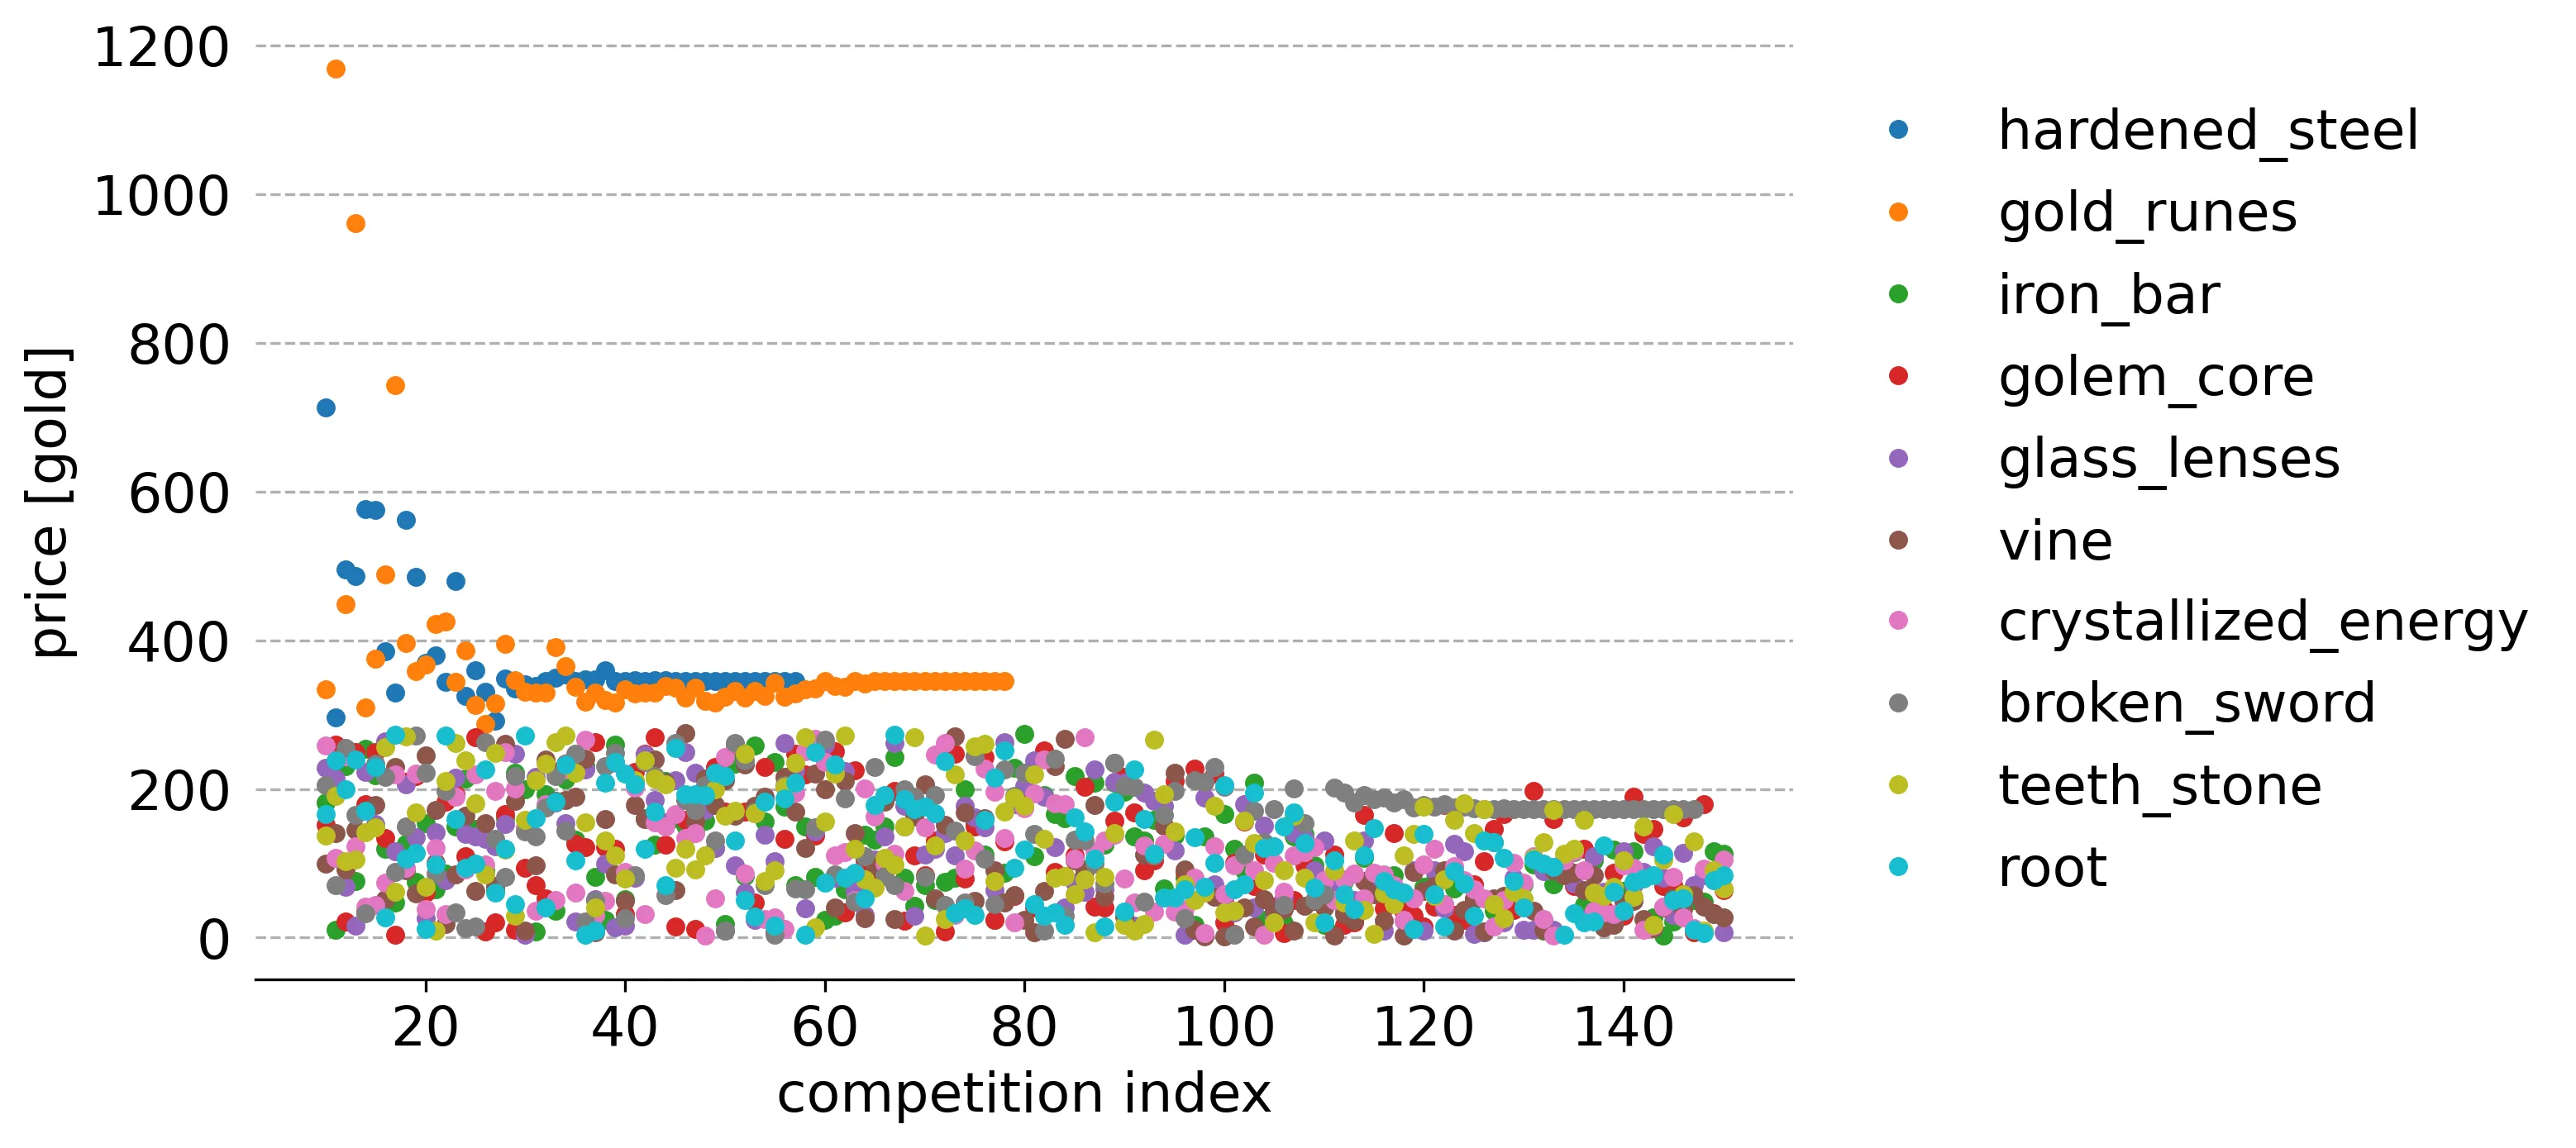 
    Shows the price (y-axis value) of each item (color) randomly chosen between its lower and upper
    ideal price bound range for that competition (index is x-value).
    Roughly corresponds to the first 105 reactions (between competitions 10 through 150, starting at
    10 to make the scale more digestible), though includes instances when a competition was
    required to replace items on shelves with prices outside of its current price bounds.
    The highest of these points for each competition ended up being moved from the inventory to the
    shelf at that price.
    Shows how gold runes and hardened steel are the only winners of those Thompson sampling
    contests, with hardened steel being sold off first, followed by gold runes.
    The sampled prices for the items osciallate below the hardened steel and gold runes values
    between the original ledger bounds.
    After those two items have been consumed the oscillating prices lower slowly until a line of
    broken sword prices level off to its ideal price and the other item's prices fluctuate between
    unchanging bounds for most, though some items end pop up above the line (presumably chosen).